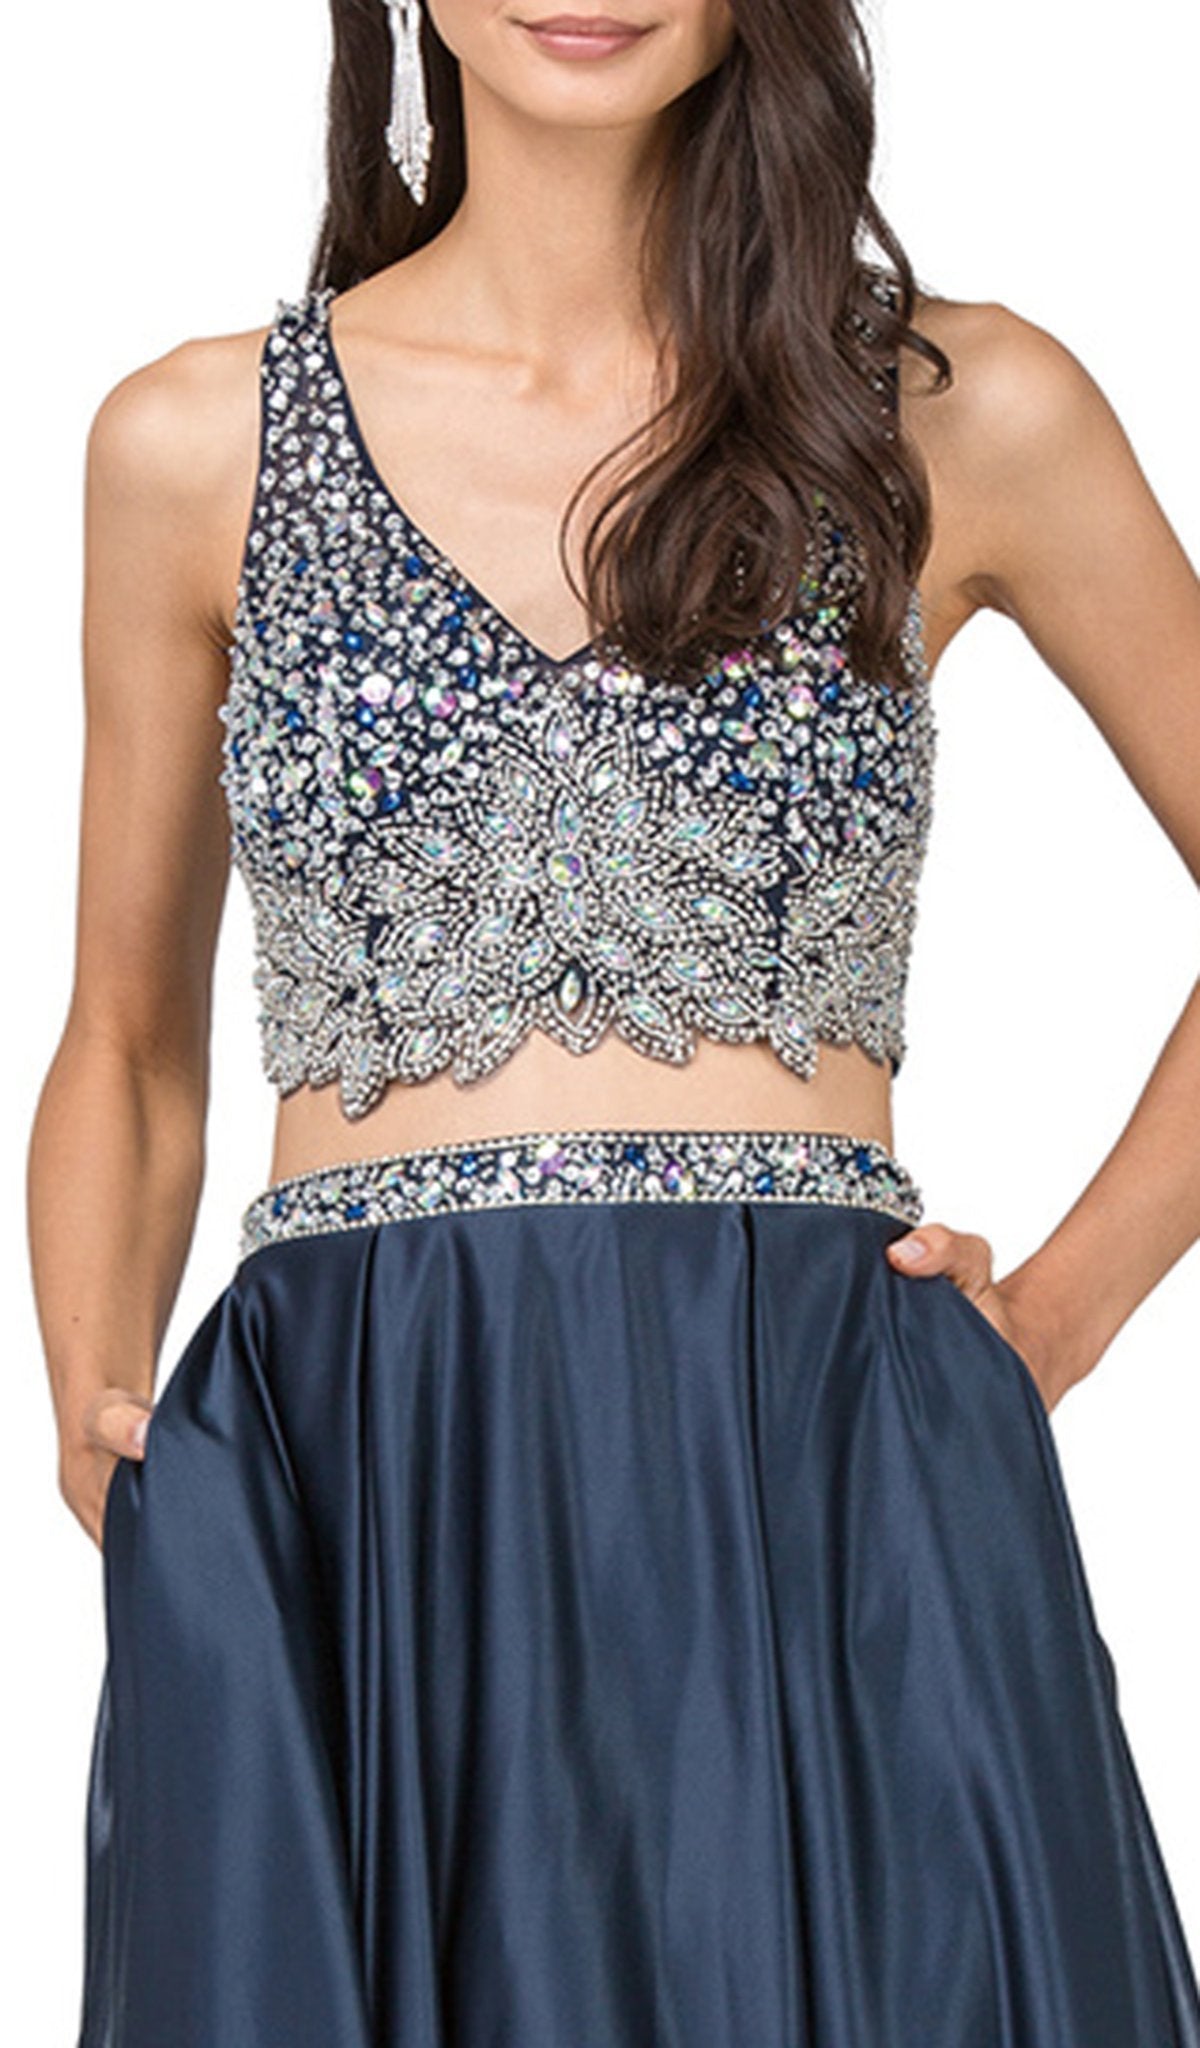 Dancing Queen - 2243 Two Piece Bejeweled A-line Prom Dress
